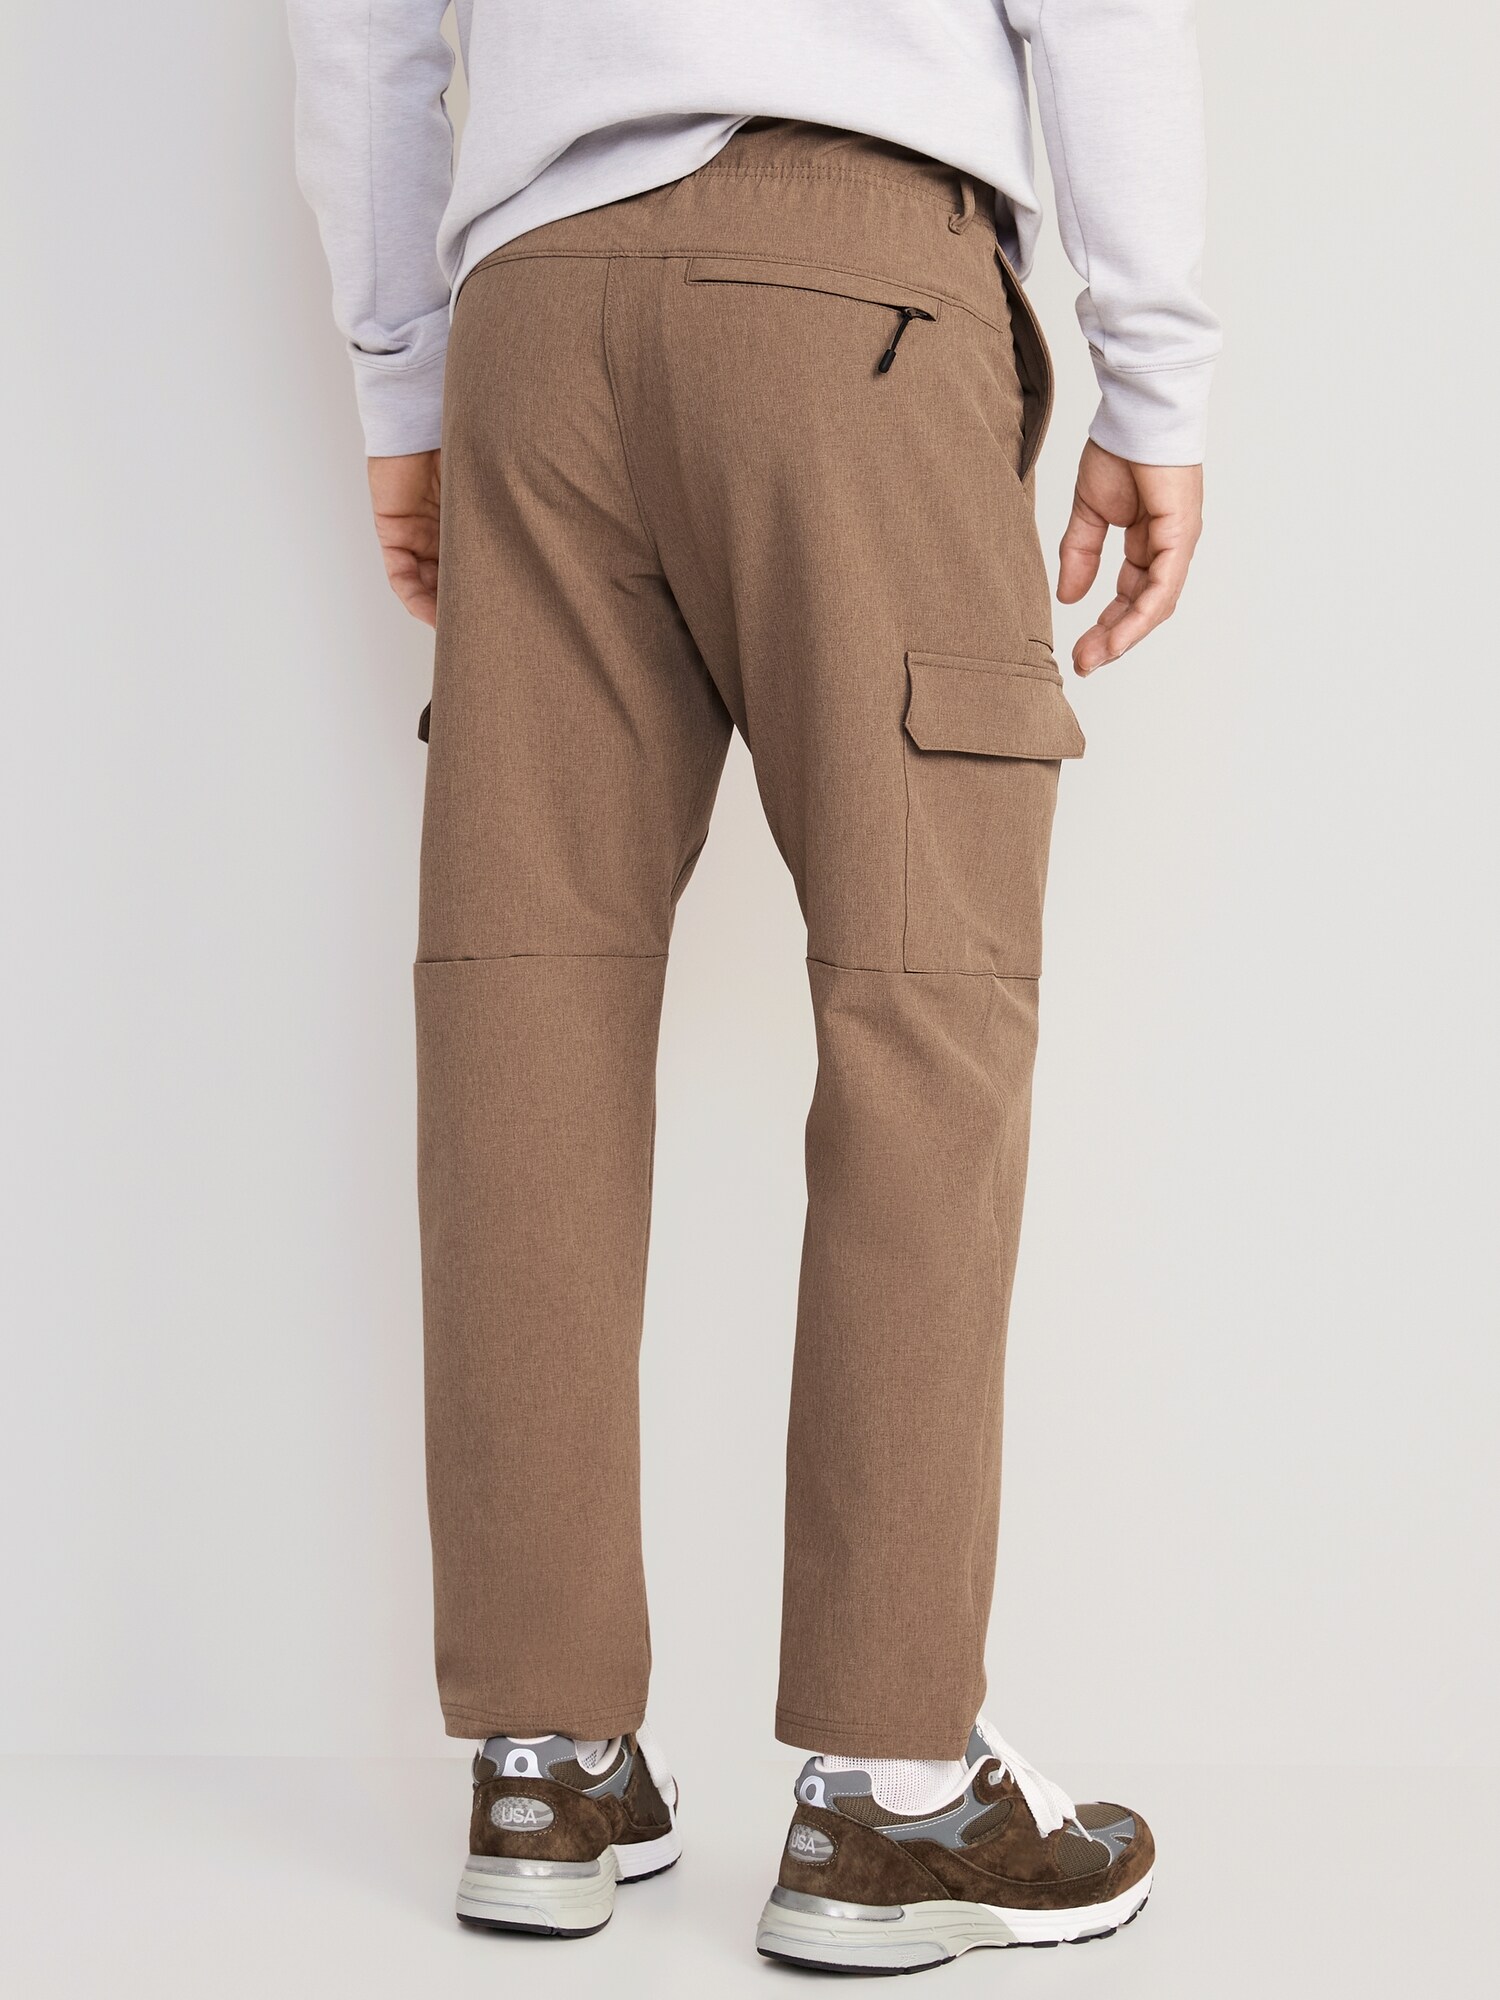 Durable & Functional Nylon-Spandex MOLLE Loose Cargo Pants for Men